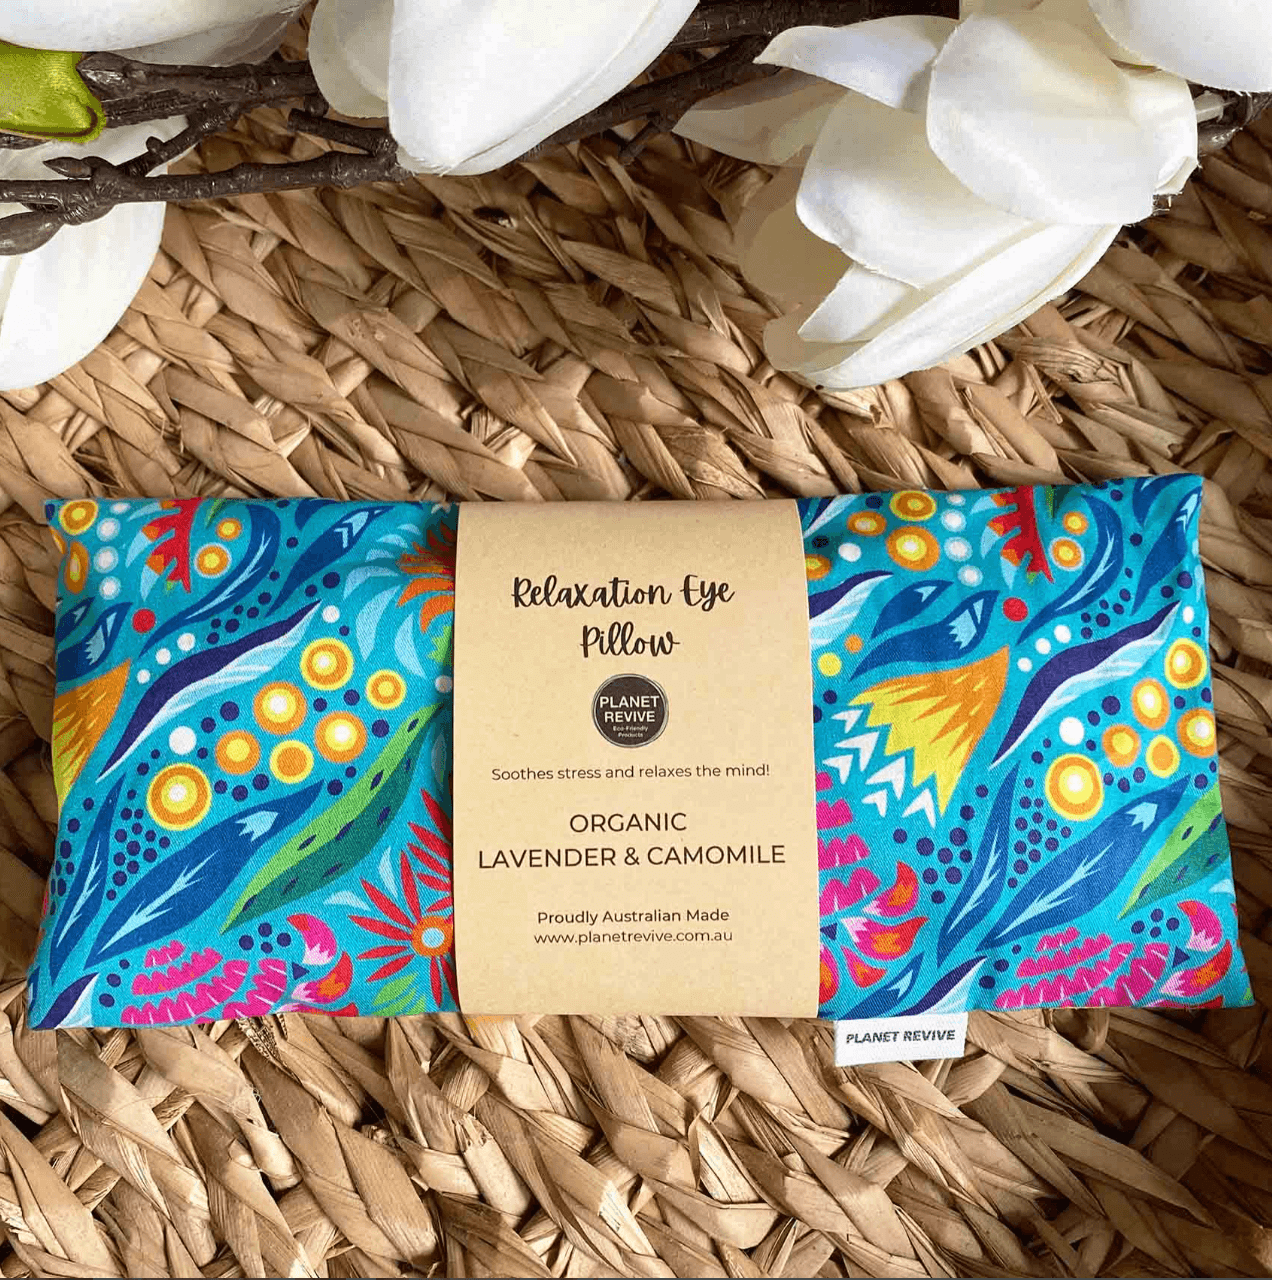 Relaxation Eye Pillow, all cotton, all natural Planet Revive KitMaii